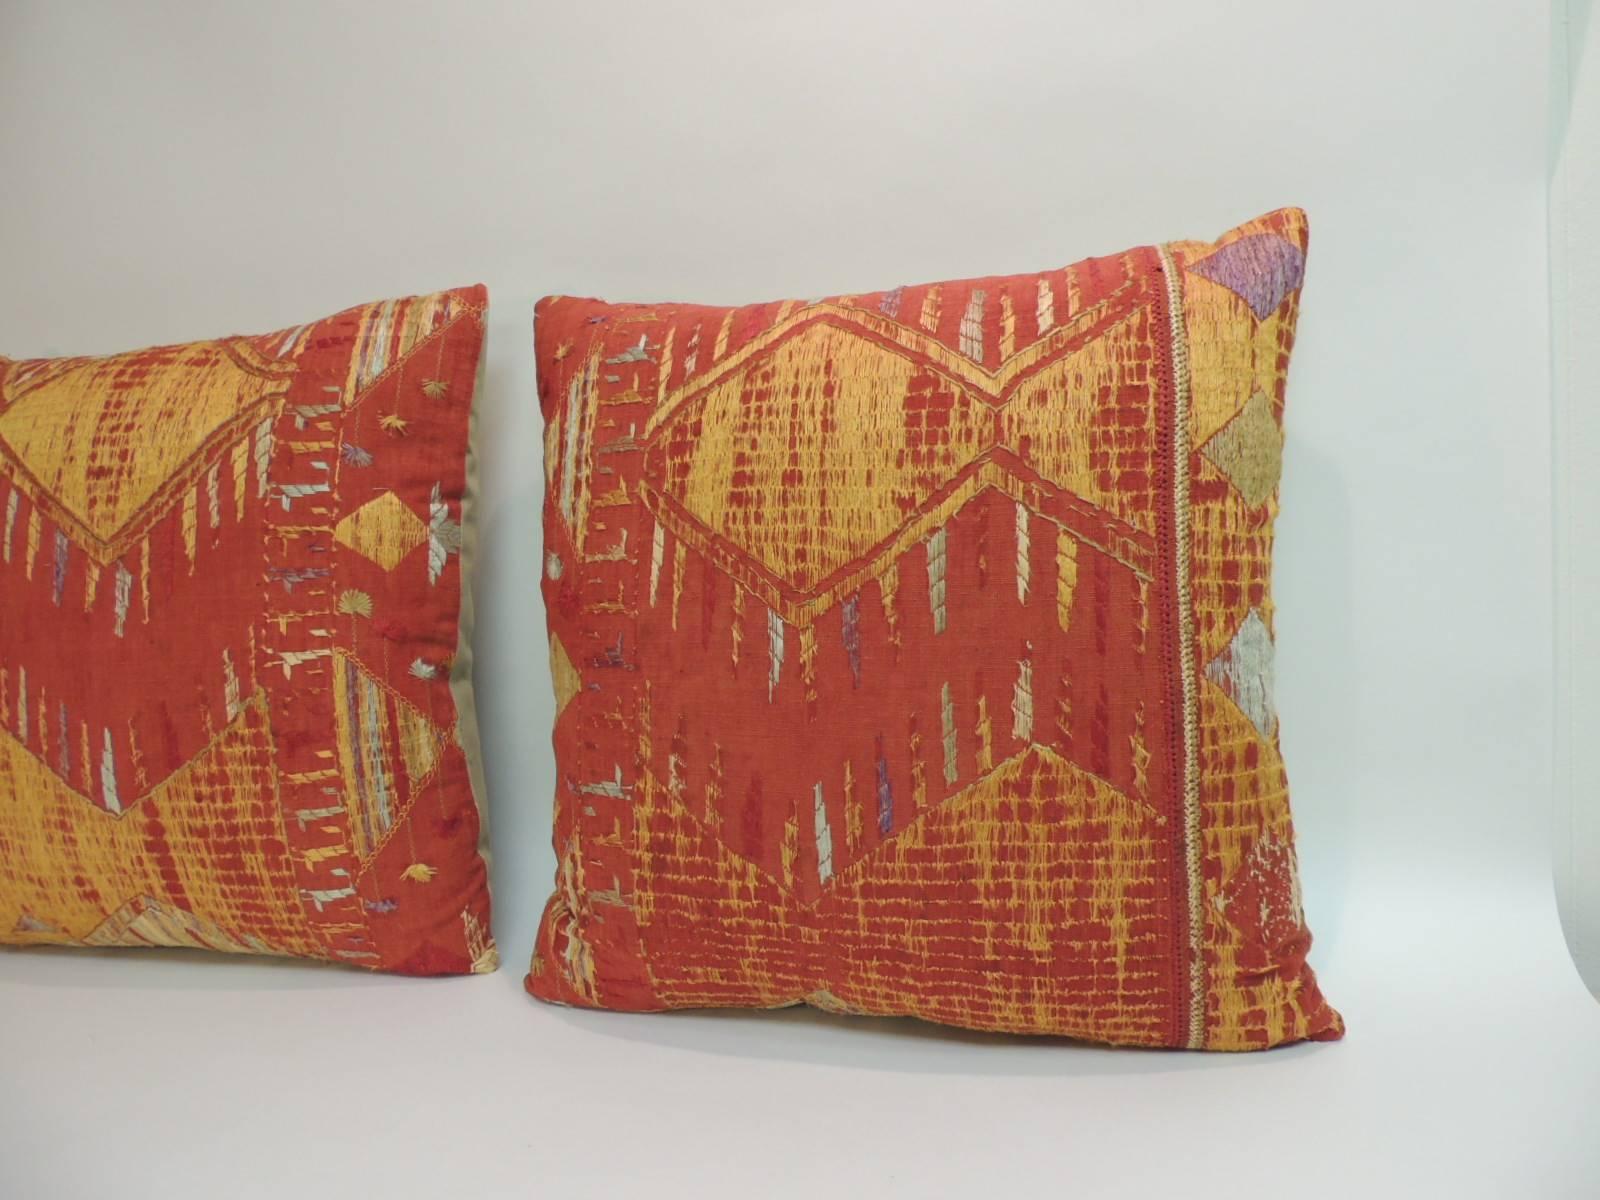 19th century embroidered linen pillows. Silk and cotton floss threads creating a tribal geometric design.
Decorative pillow handcrafted and designed in the USA. Closure by stitch (no zipper closure) with a custom-made pillow insert.
Size: 20 x 20 x